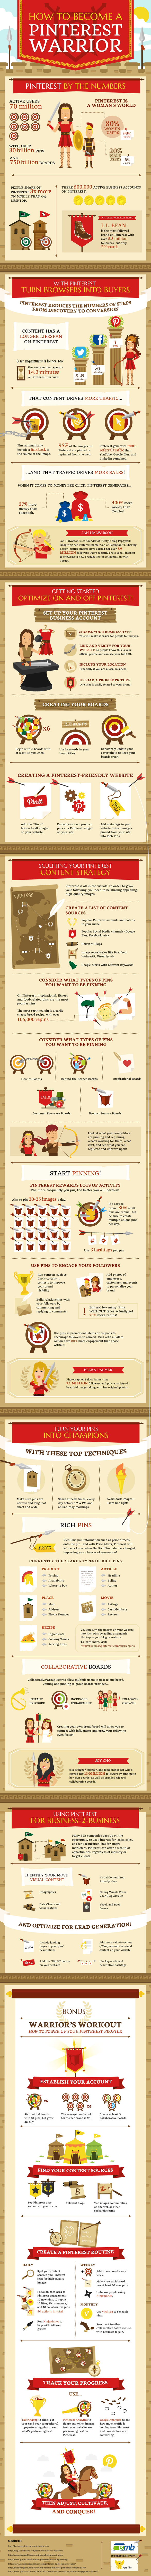 How To Become a Pinterest Warrior Infographic